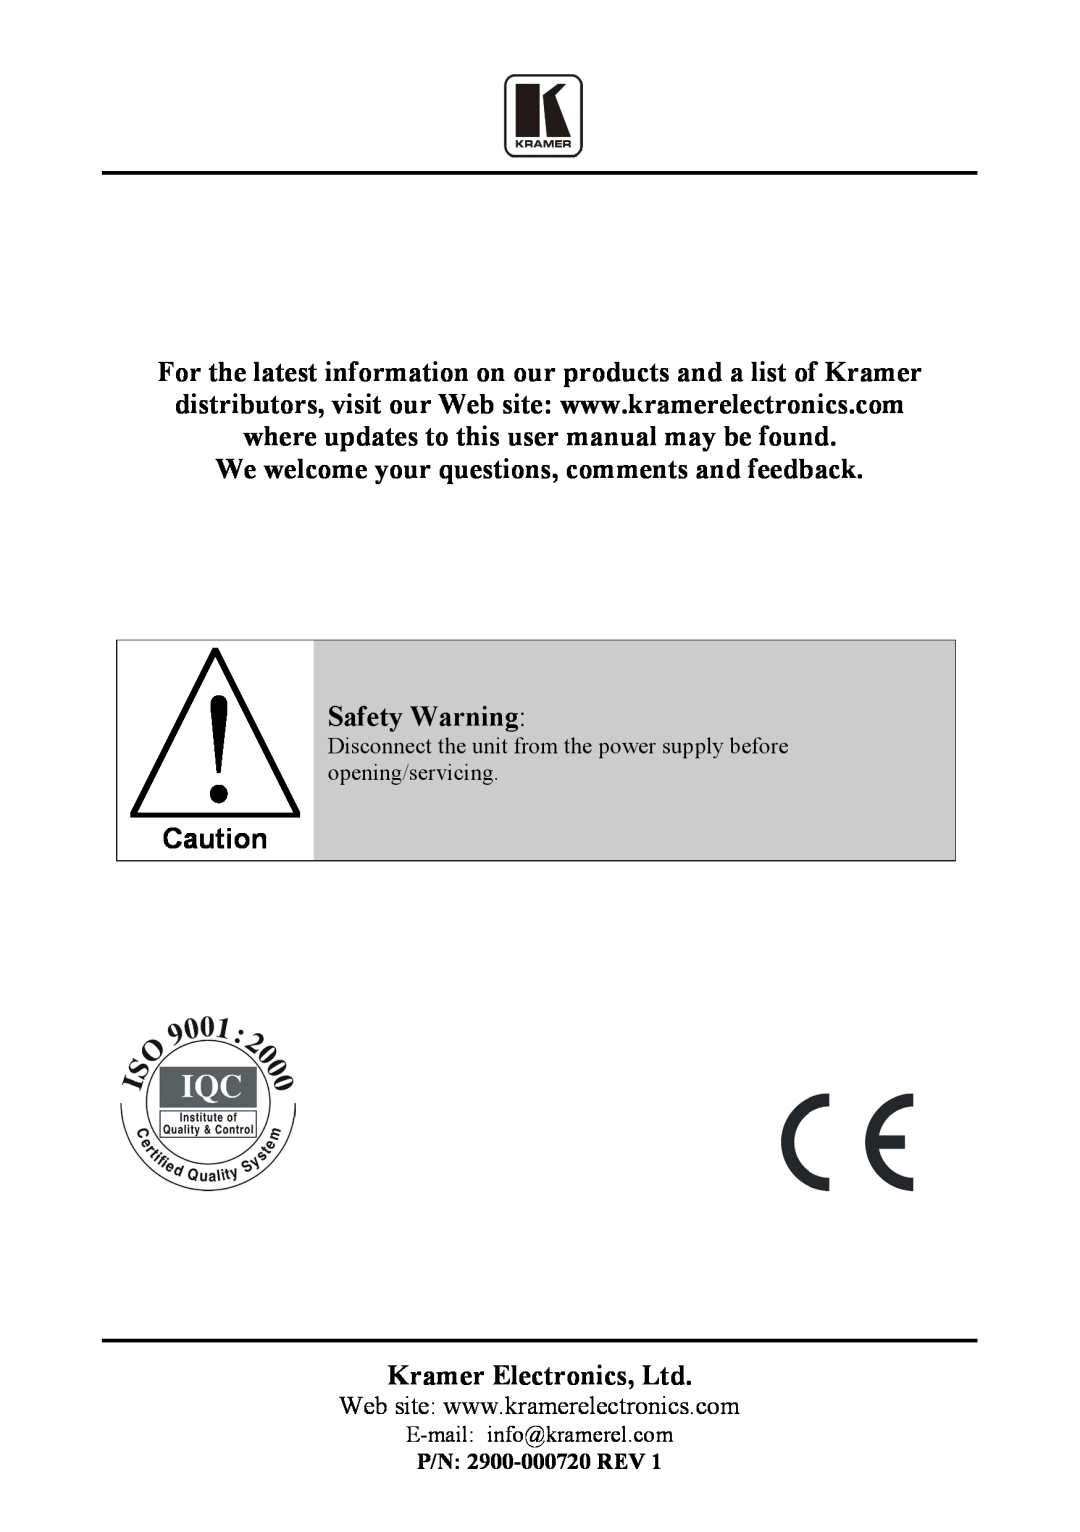 Kramer Electronics RTBUS-110 We welcome your questions, comments and feedback Safety Warning, P/N 2900-000720 REV 